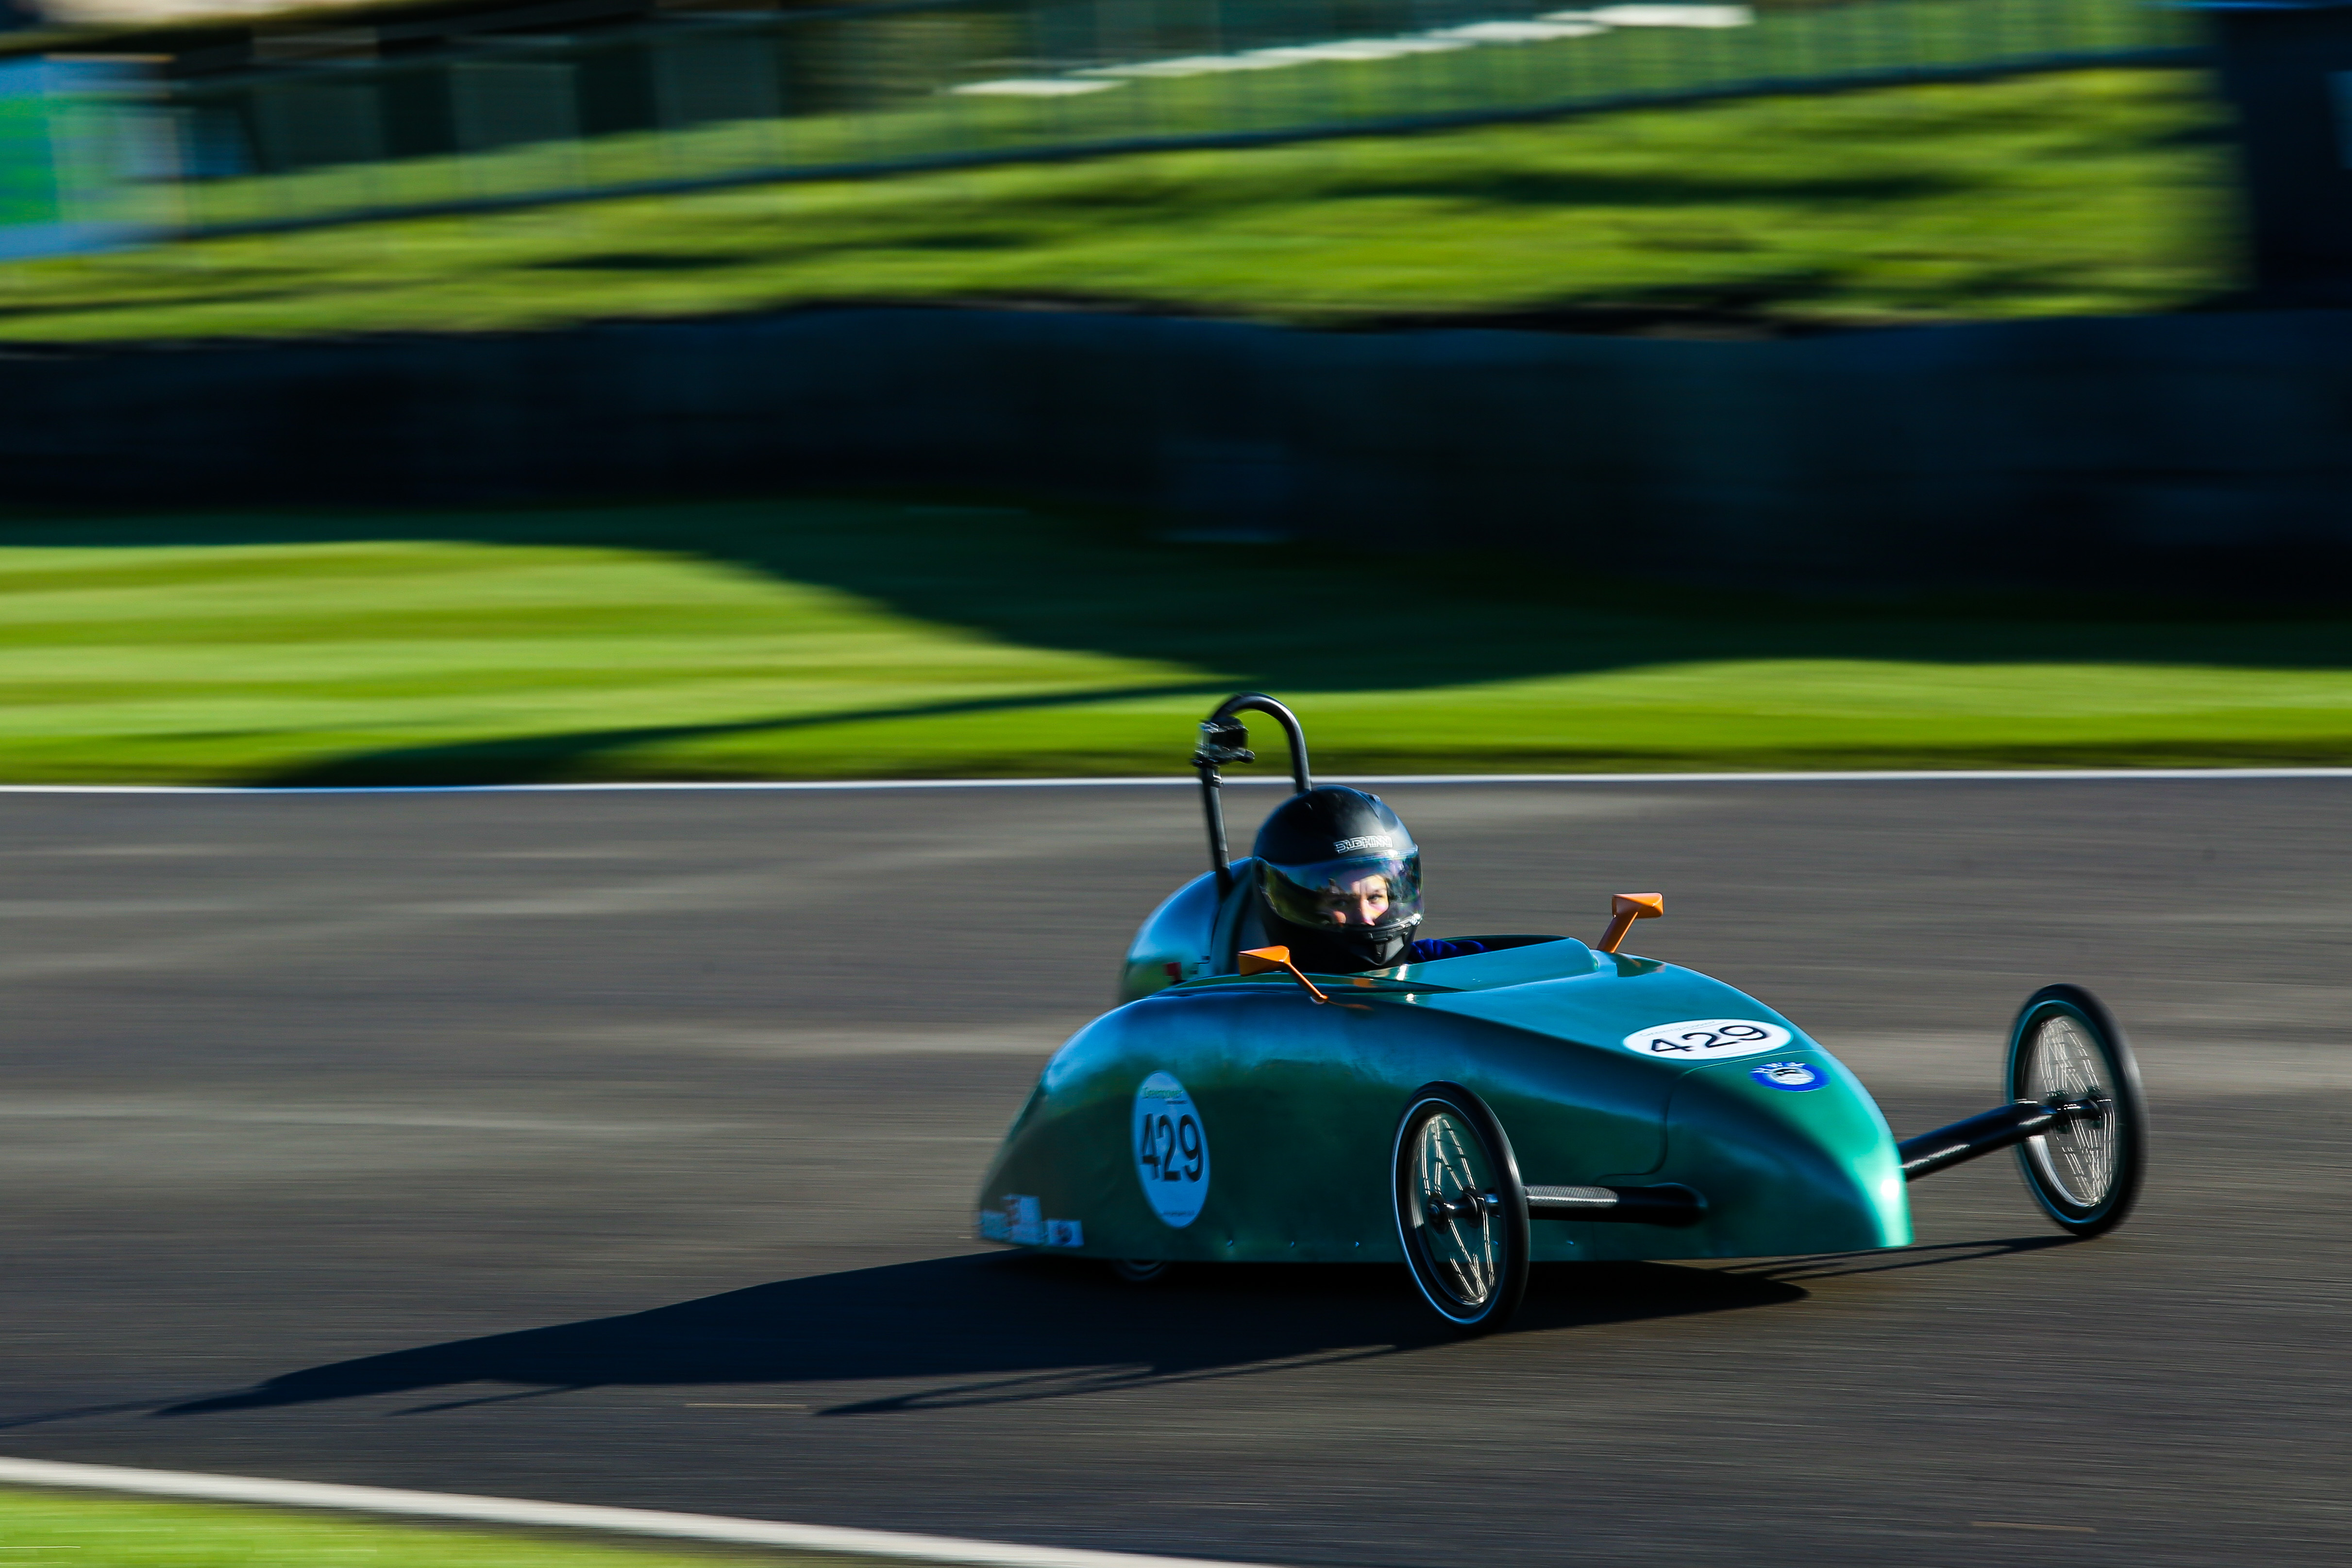 The Sylvia Beaufoy Centre cars in action at Goodwood (1)